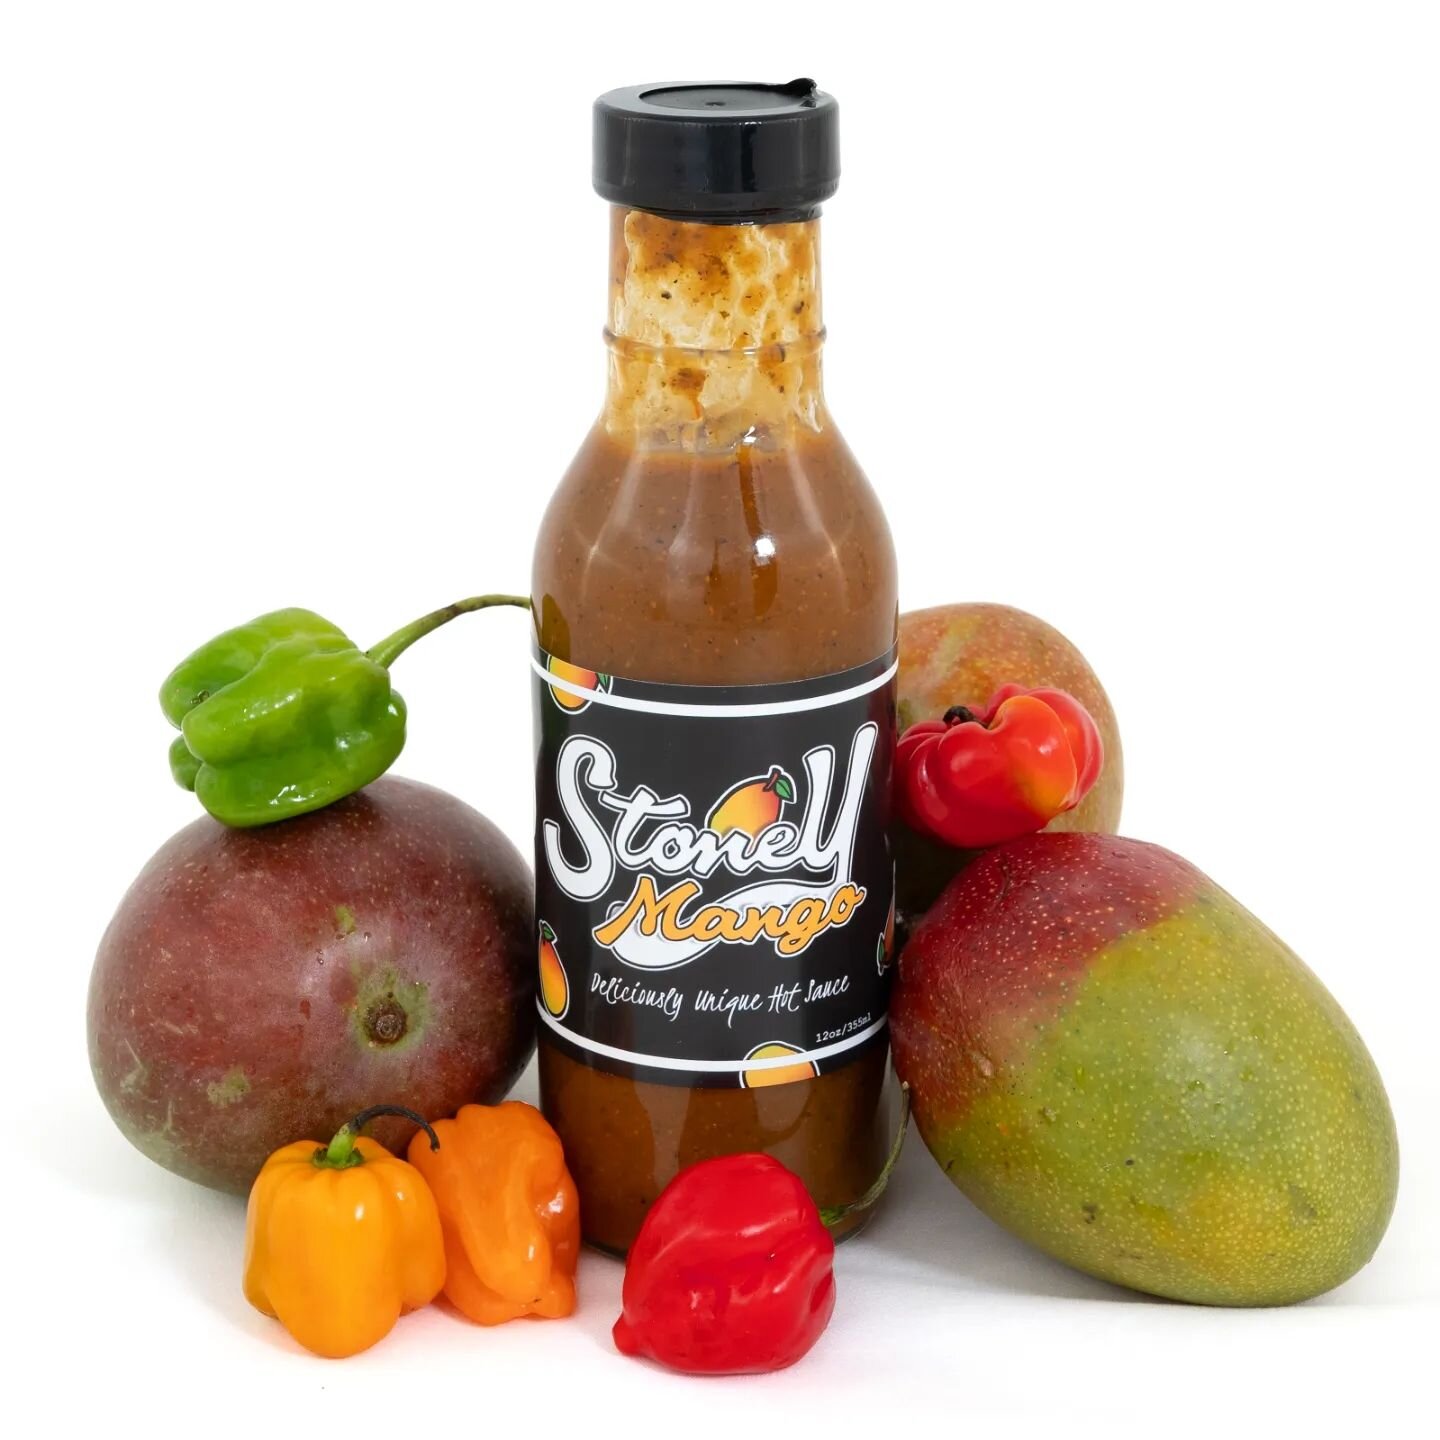 🥭 Mango + Scotch Bonnet🌶️🫑
A delicious mix of mango sweet, and scotch bonnet heat. 

And now an incomplete emoji list of foods Stoney Mango goes great with: 🍔🌭🥪🍟🍕🌮🌯🥙🥘🍝🍲🍛🍜🍤